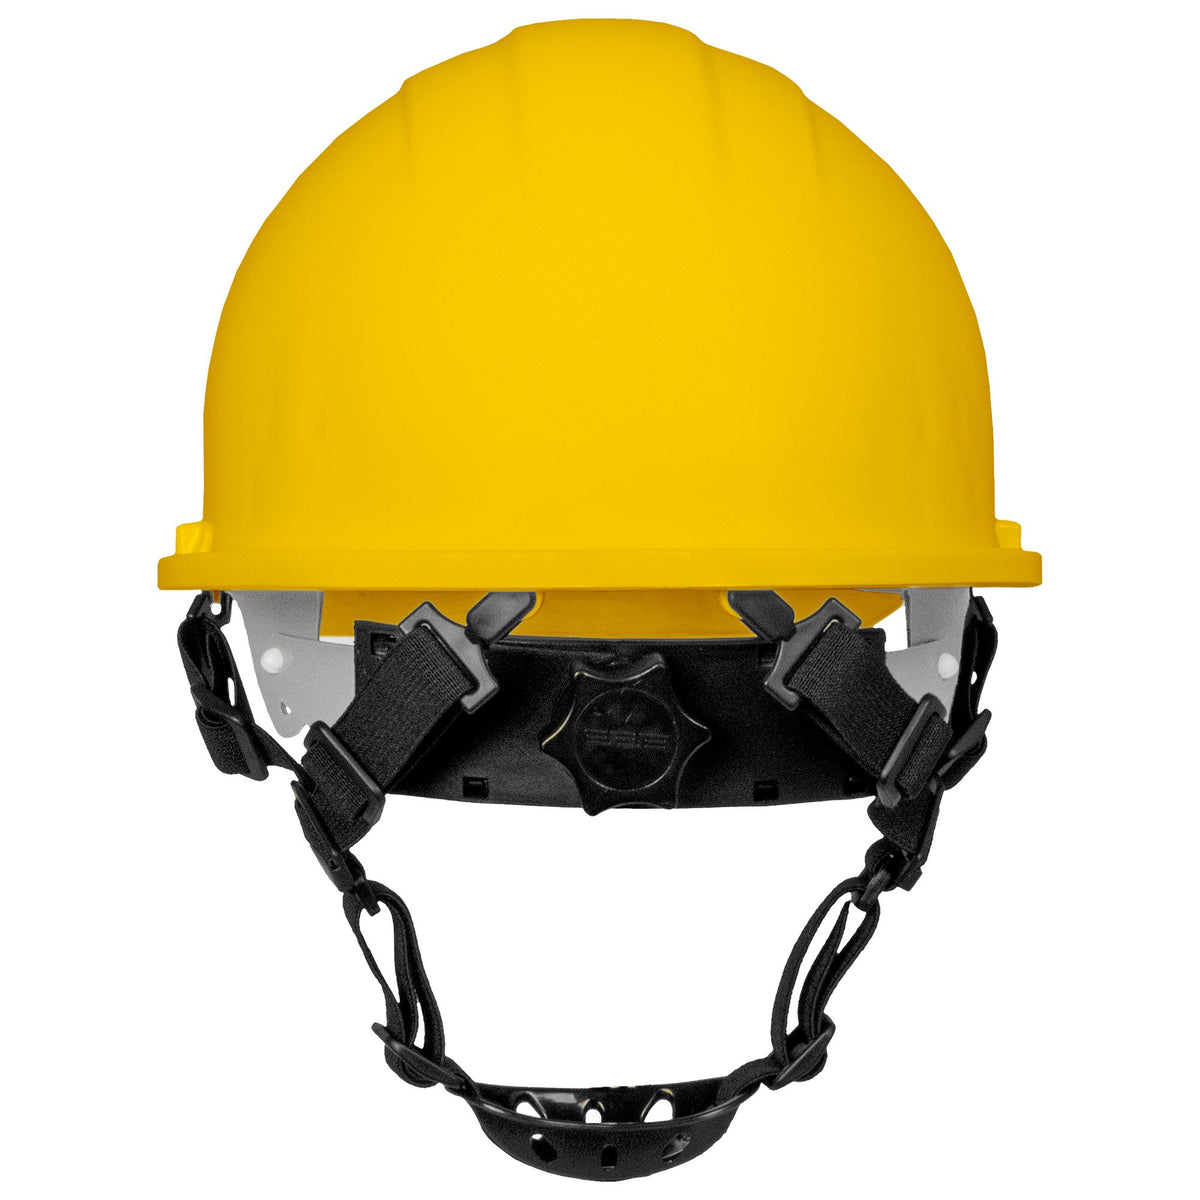 Americana® Cap designed for use with 2- and 4-Point Chin Straps (sold separately)